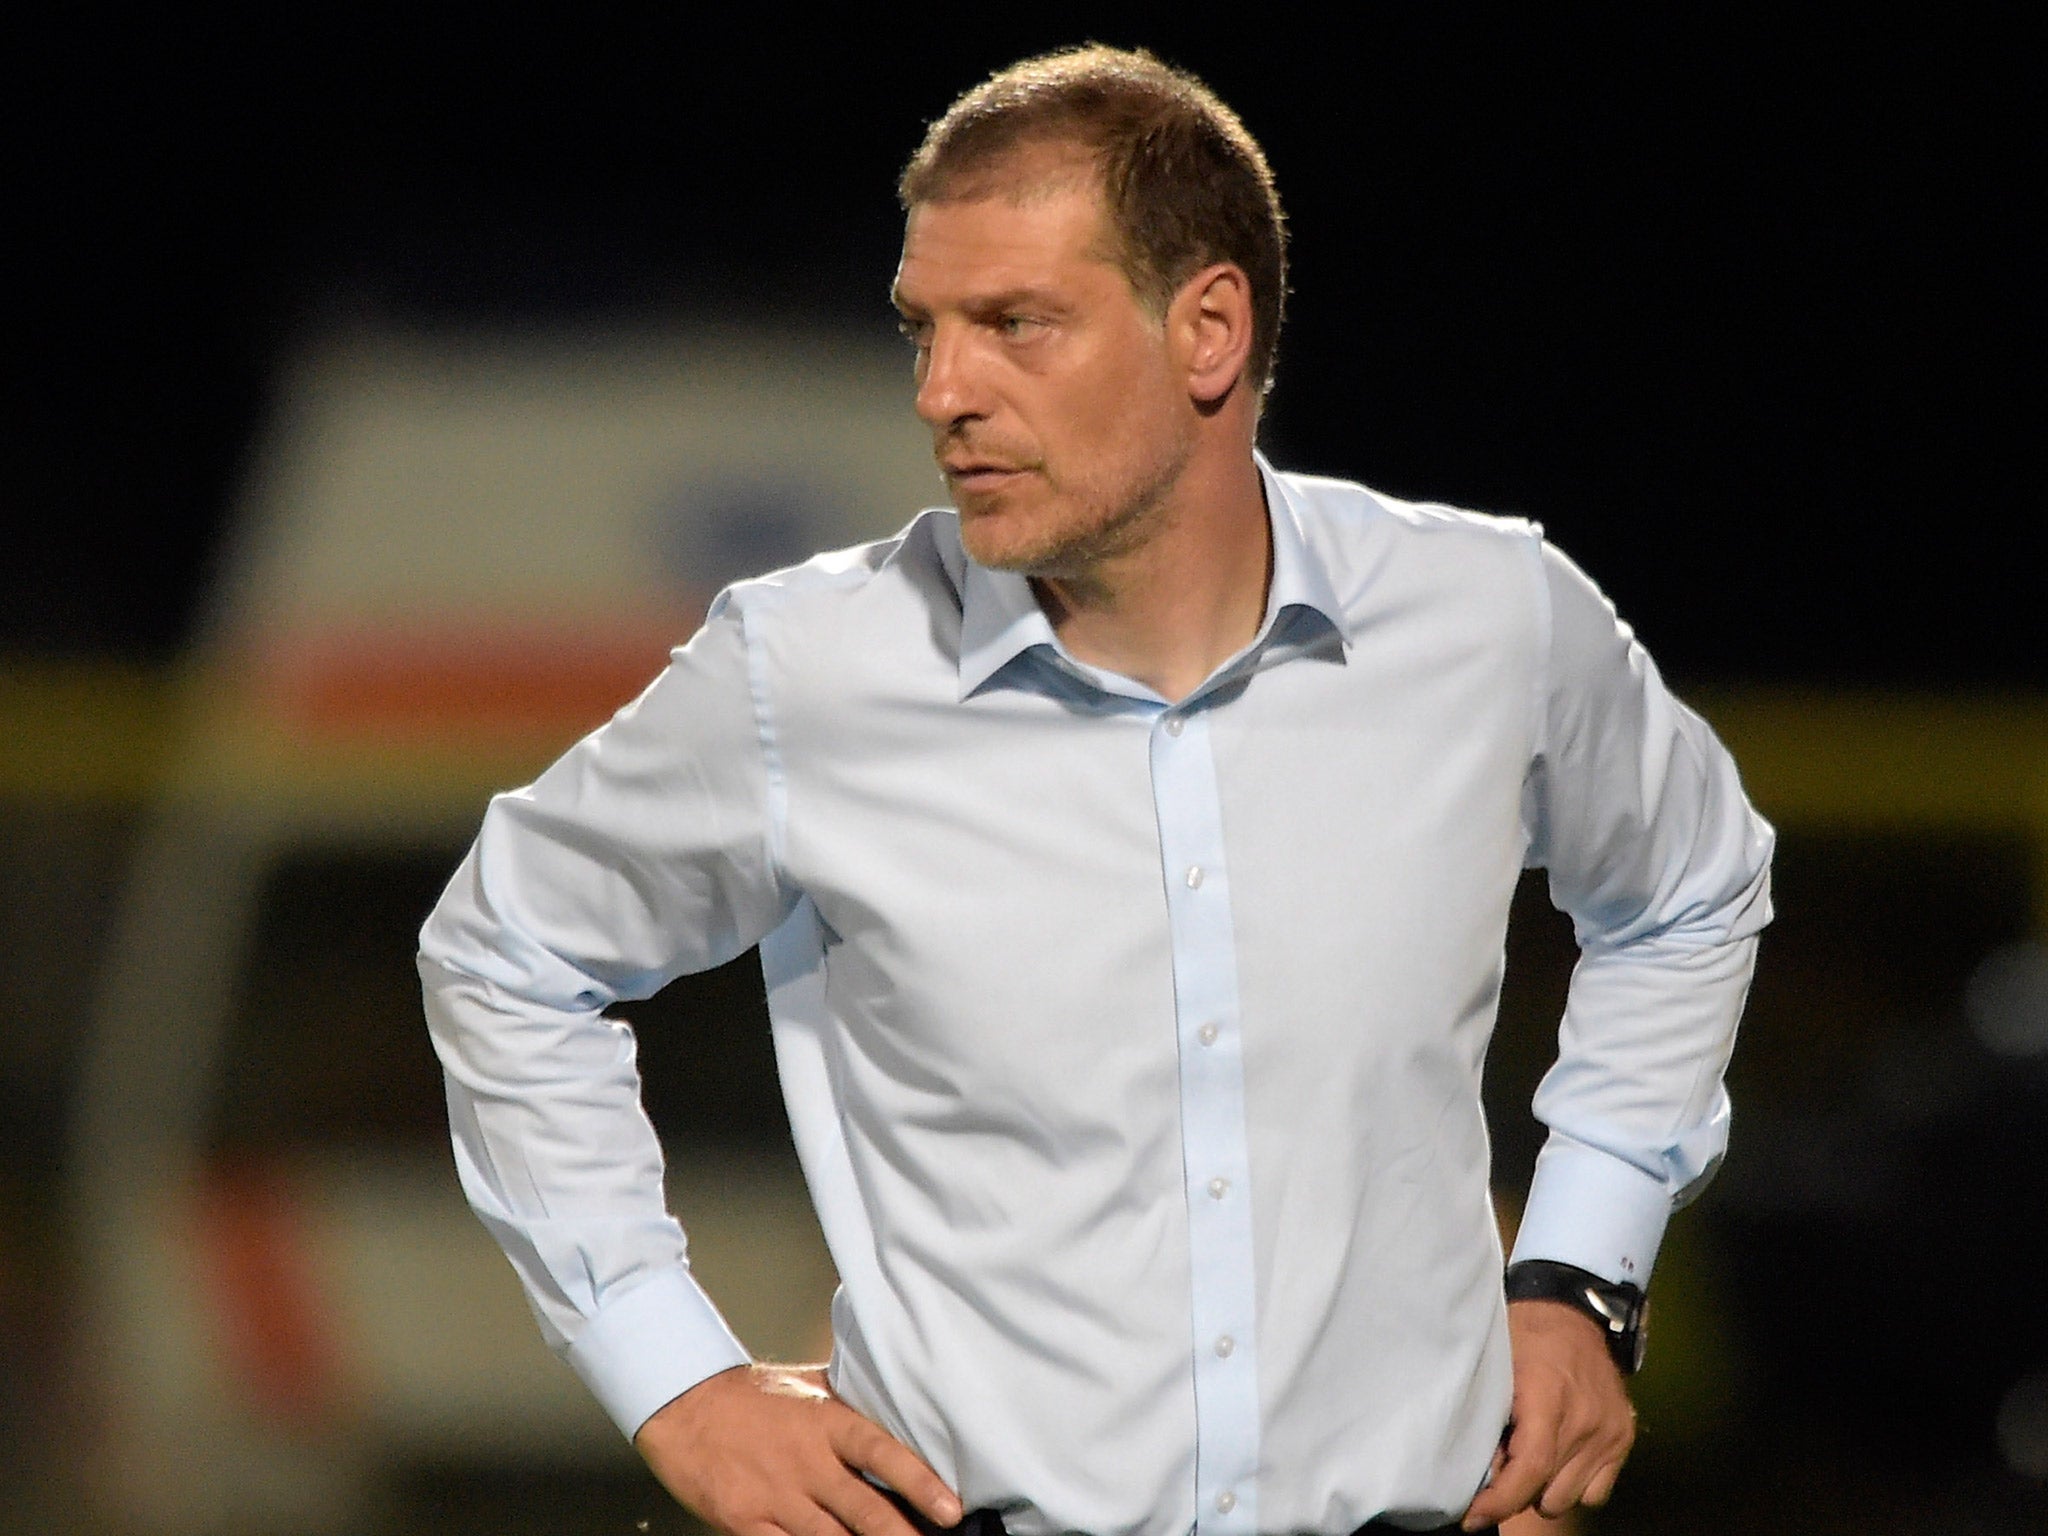 Slaven Bilic believes his West Ham side have enough to reach the Europa League group stage